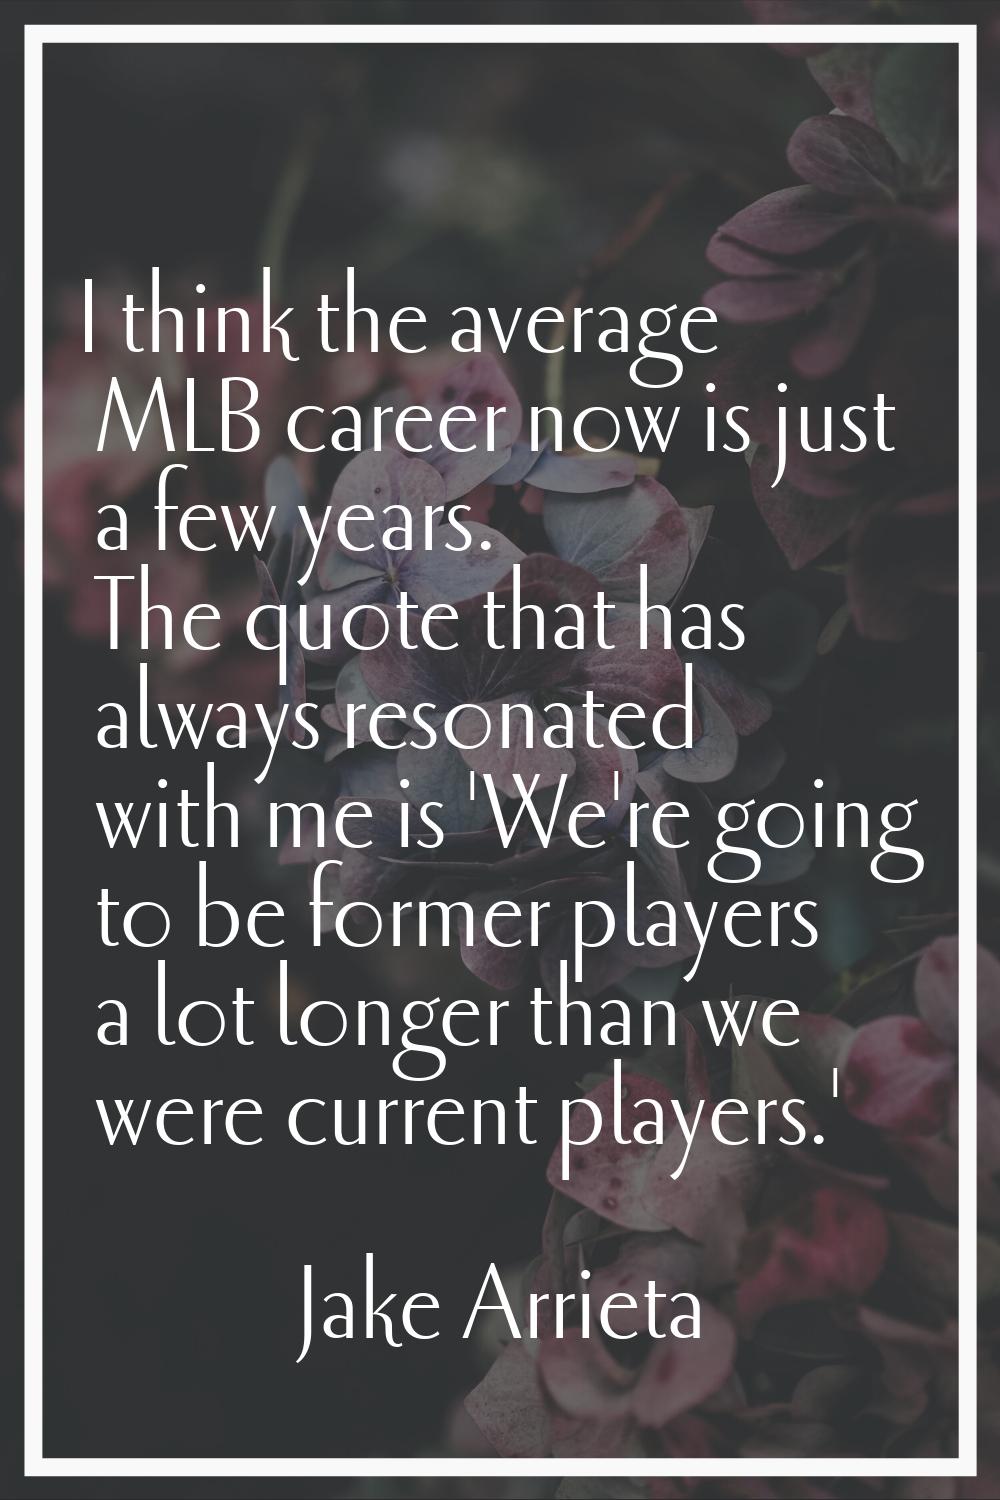 I think the average MLB career now is just a few years. The quote that has always resonated with me